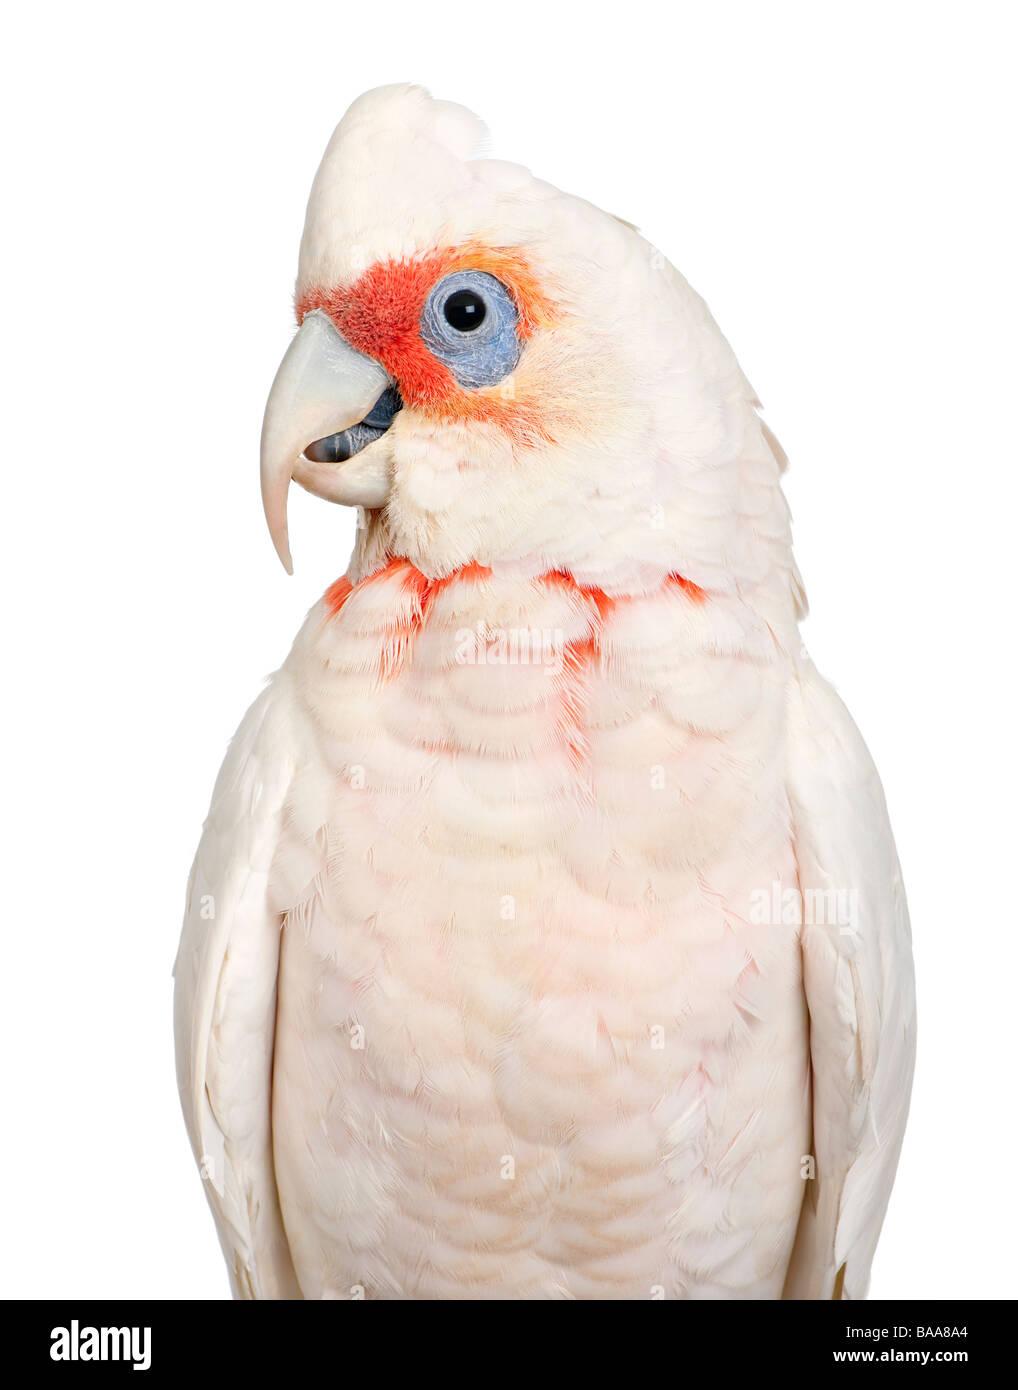 Long billed Corella Cacatua tenuirostris in front of a white background He look Similar in appearance to the Little Corella and Stock Photo